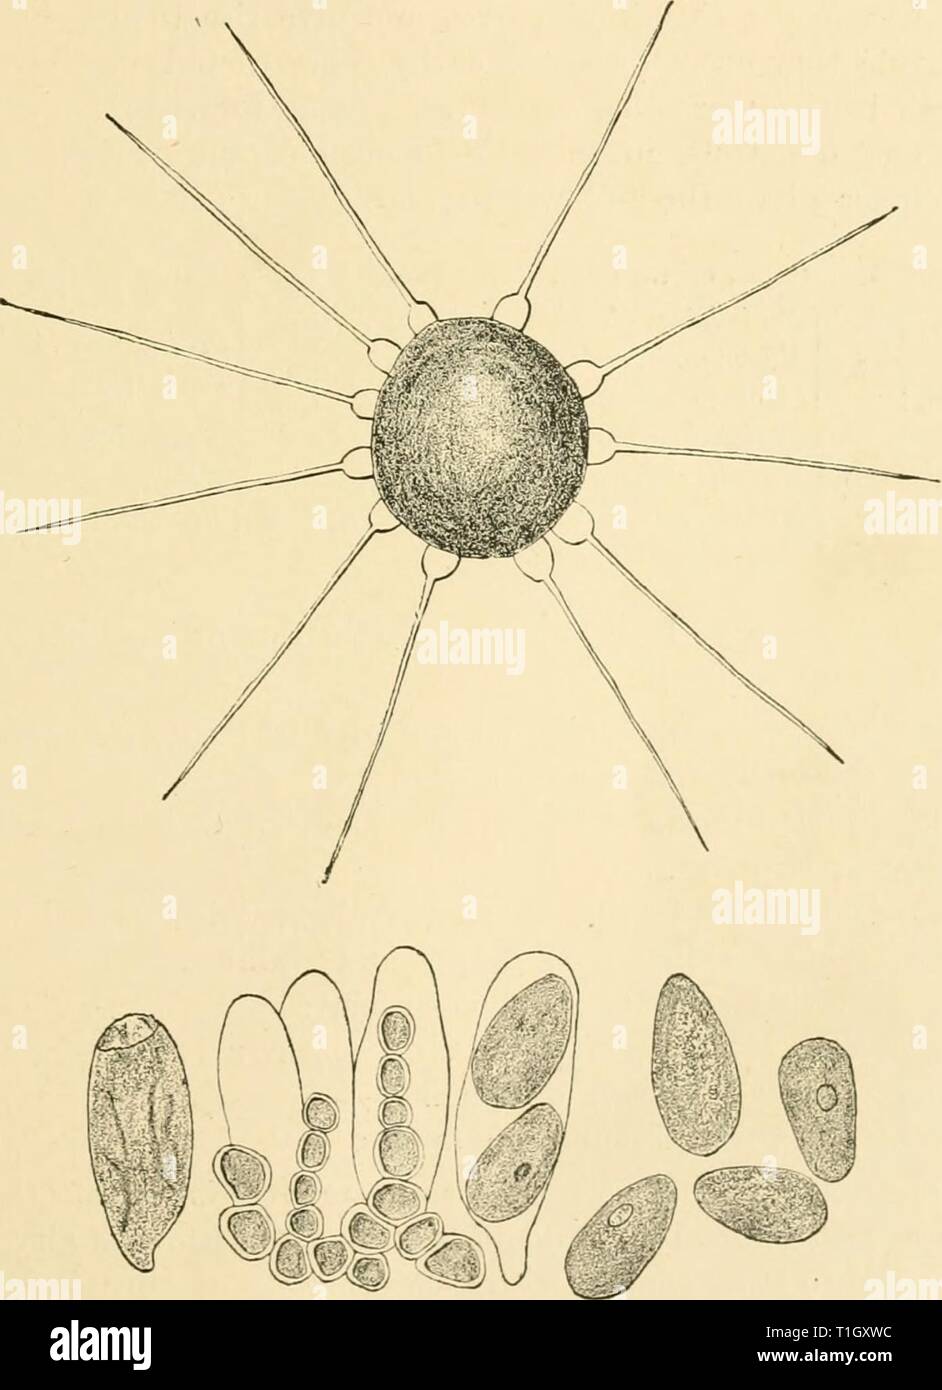 Diseases of plants induced by Diseases of plants induced by cryptogamic parasites; introduction to the study of pathogenic Fungi, slime-Fungi, bacteria, & Algae  diseasesofplants00tube Year: 1897  PERISPORIEAE. 179 Aspergillus, Faiicilliam, Zopfia, Pcrisporiuin, Lasiobotrijs, Apio- sporium, Caimodiuvi, Astcrina, Microthyriuiifh. To this sub-division of the Perisporiaceae belong some com- mon forms of mould-fungi which are generally only saprophytic,    Fio. l.—PhyUactlnia suffulta from Beech. Perithecium, with characteristic appendages. Contents of the perithecium : asci, spores, and cliains o Stock Photo